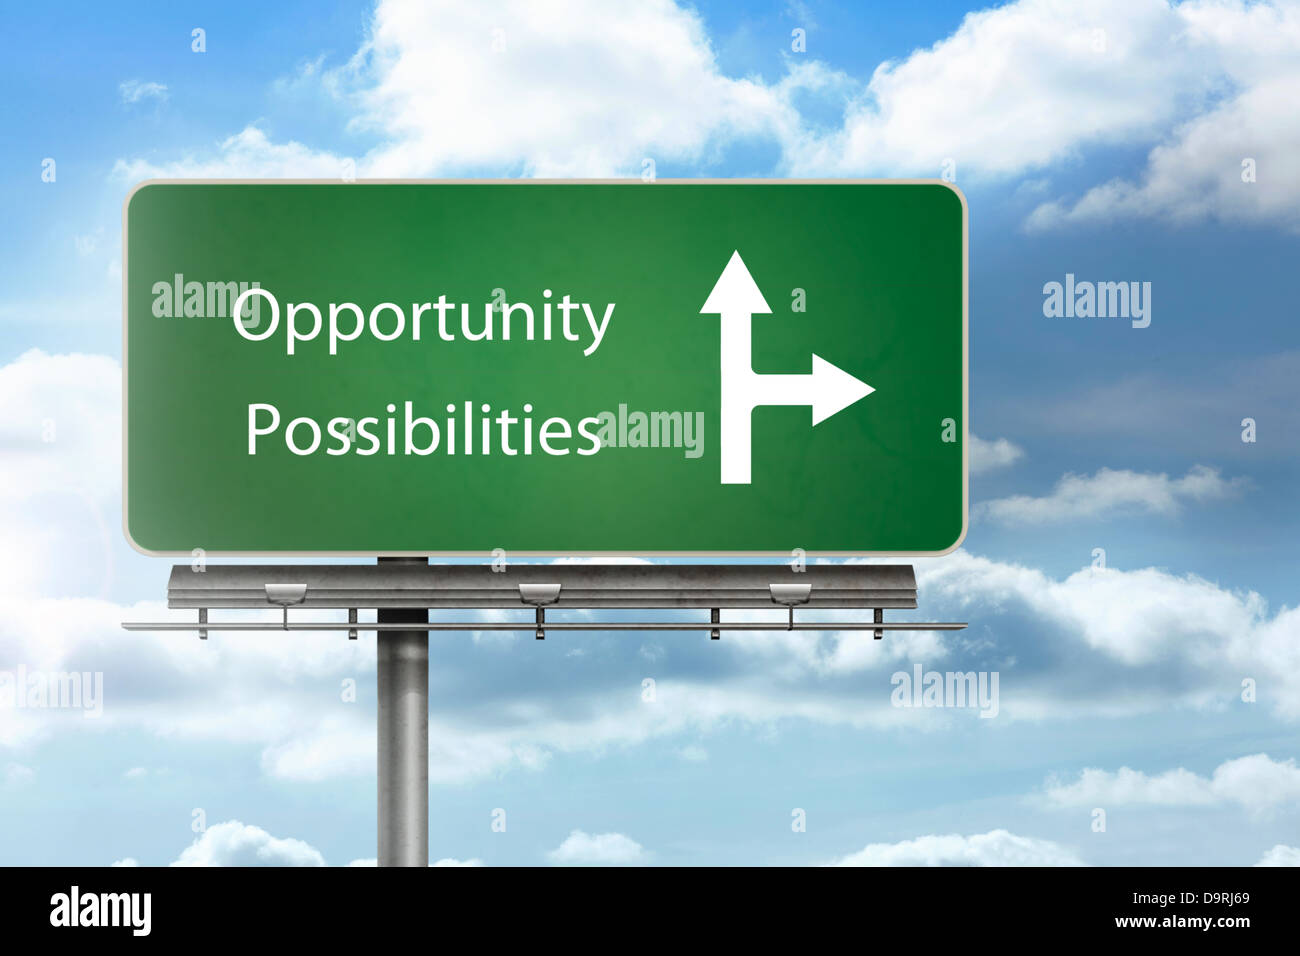 Opportunity and possibilities written over a signpost Stock Photo